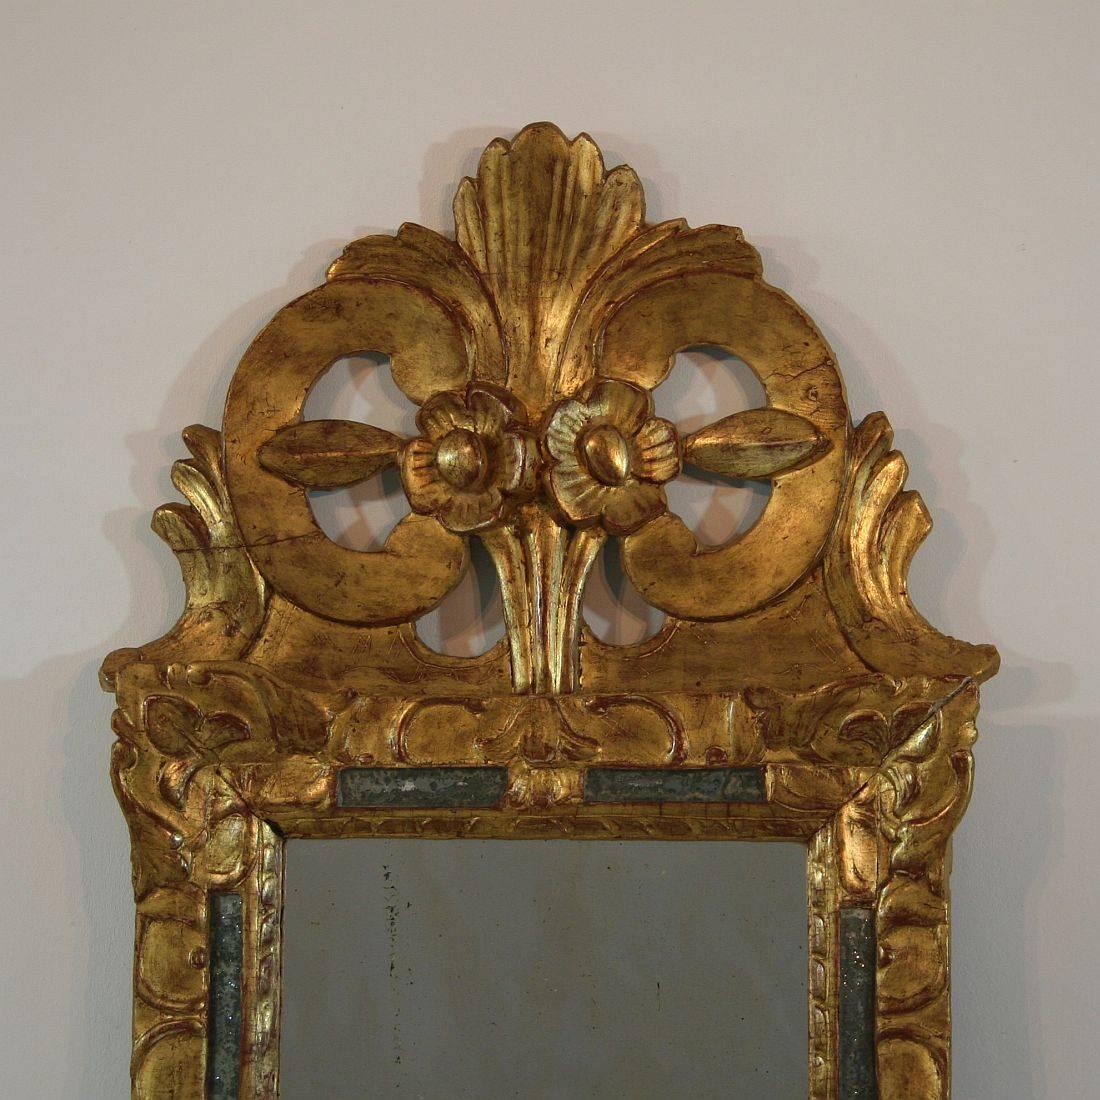 An extremely rare Louis XIV period mirror with stunning gilt. The frame is hand-carved with stylized fleurs-de-lys & foliage, and the margin is pierced with eight narrow rectangles of mercury glass plate. On top, the beautiful pierced crest features